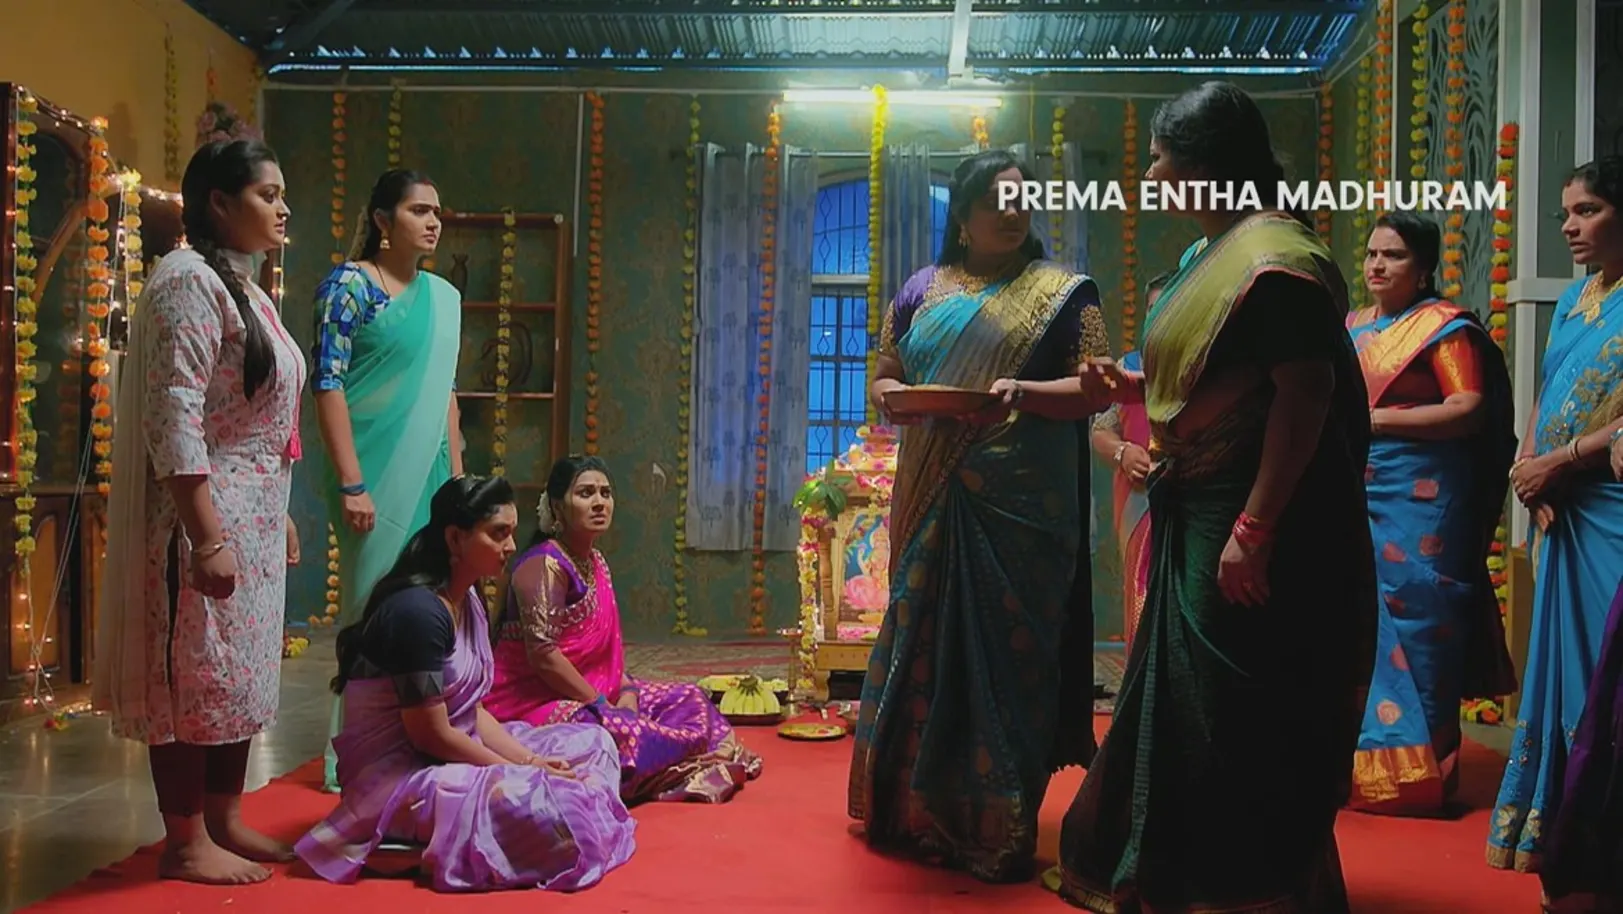 Anu Is Exposed for Begging at the Temple | Prema Entha Maduram | Promo